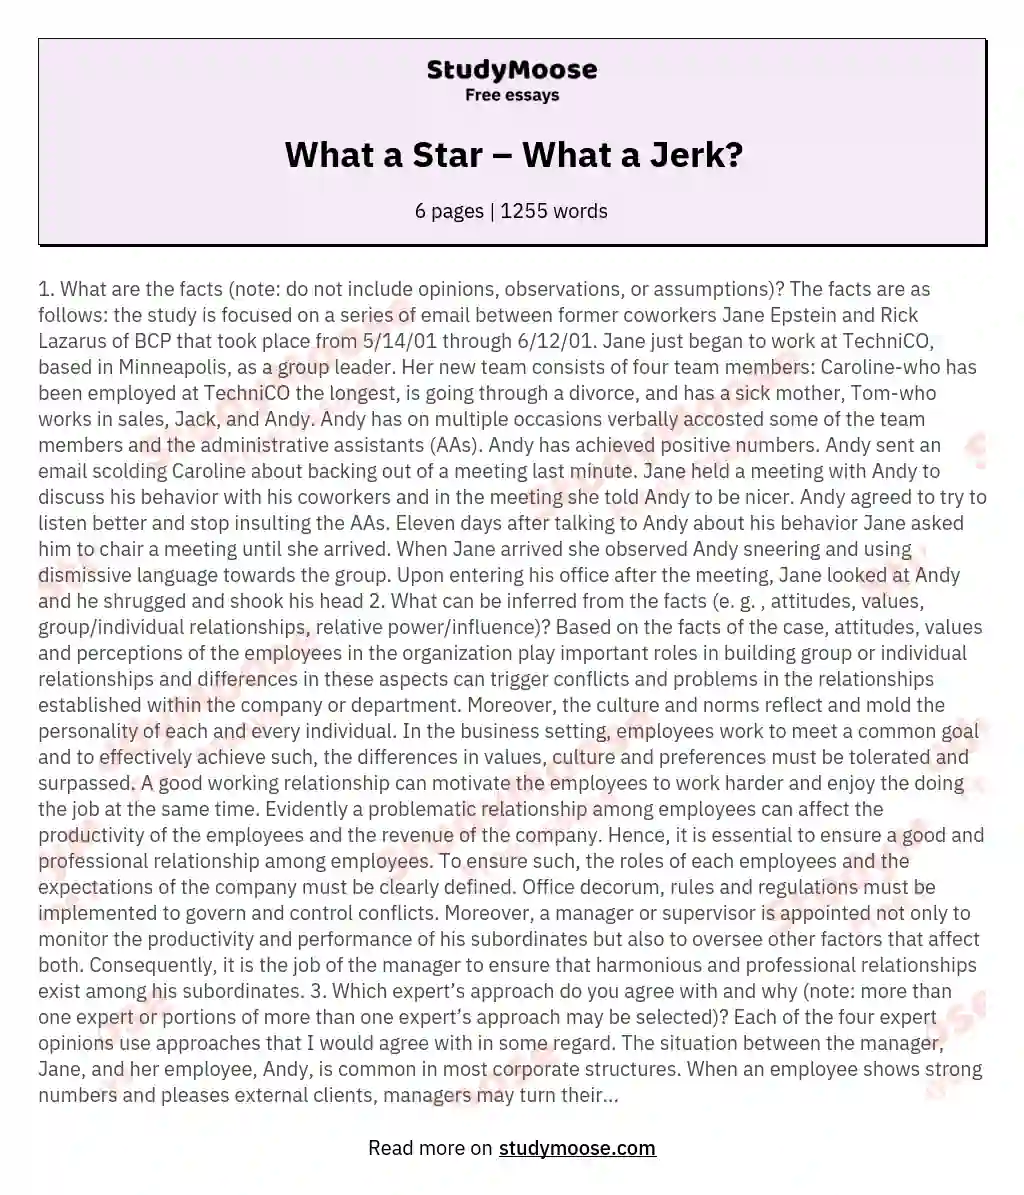 What a Star – What a Jerk? essay